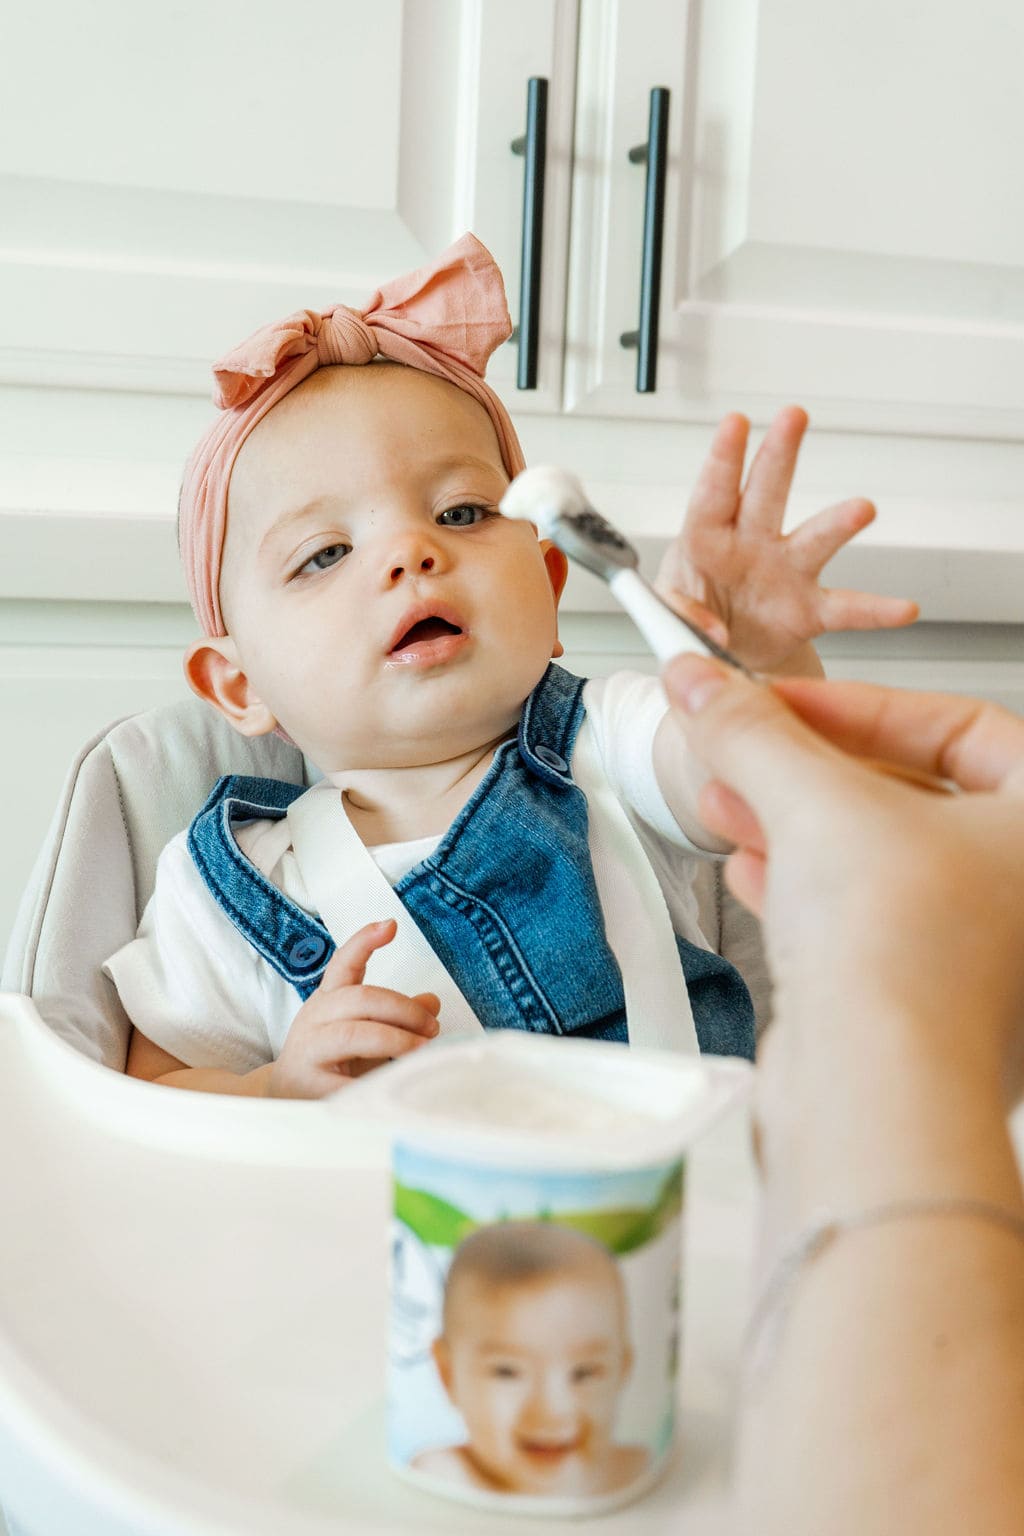 A spoon with yogurt on it and a hand giving it to the baby girl in her high chair.